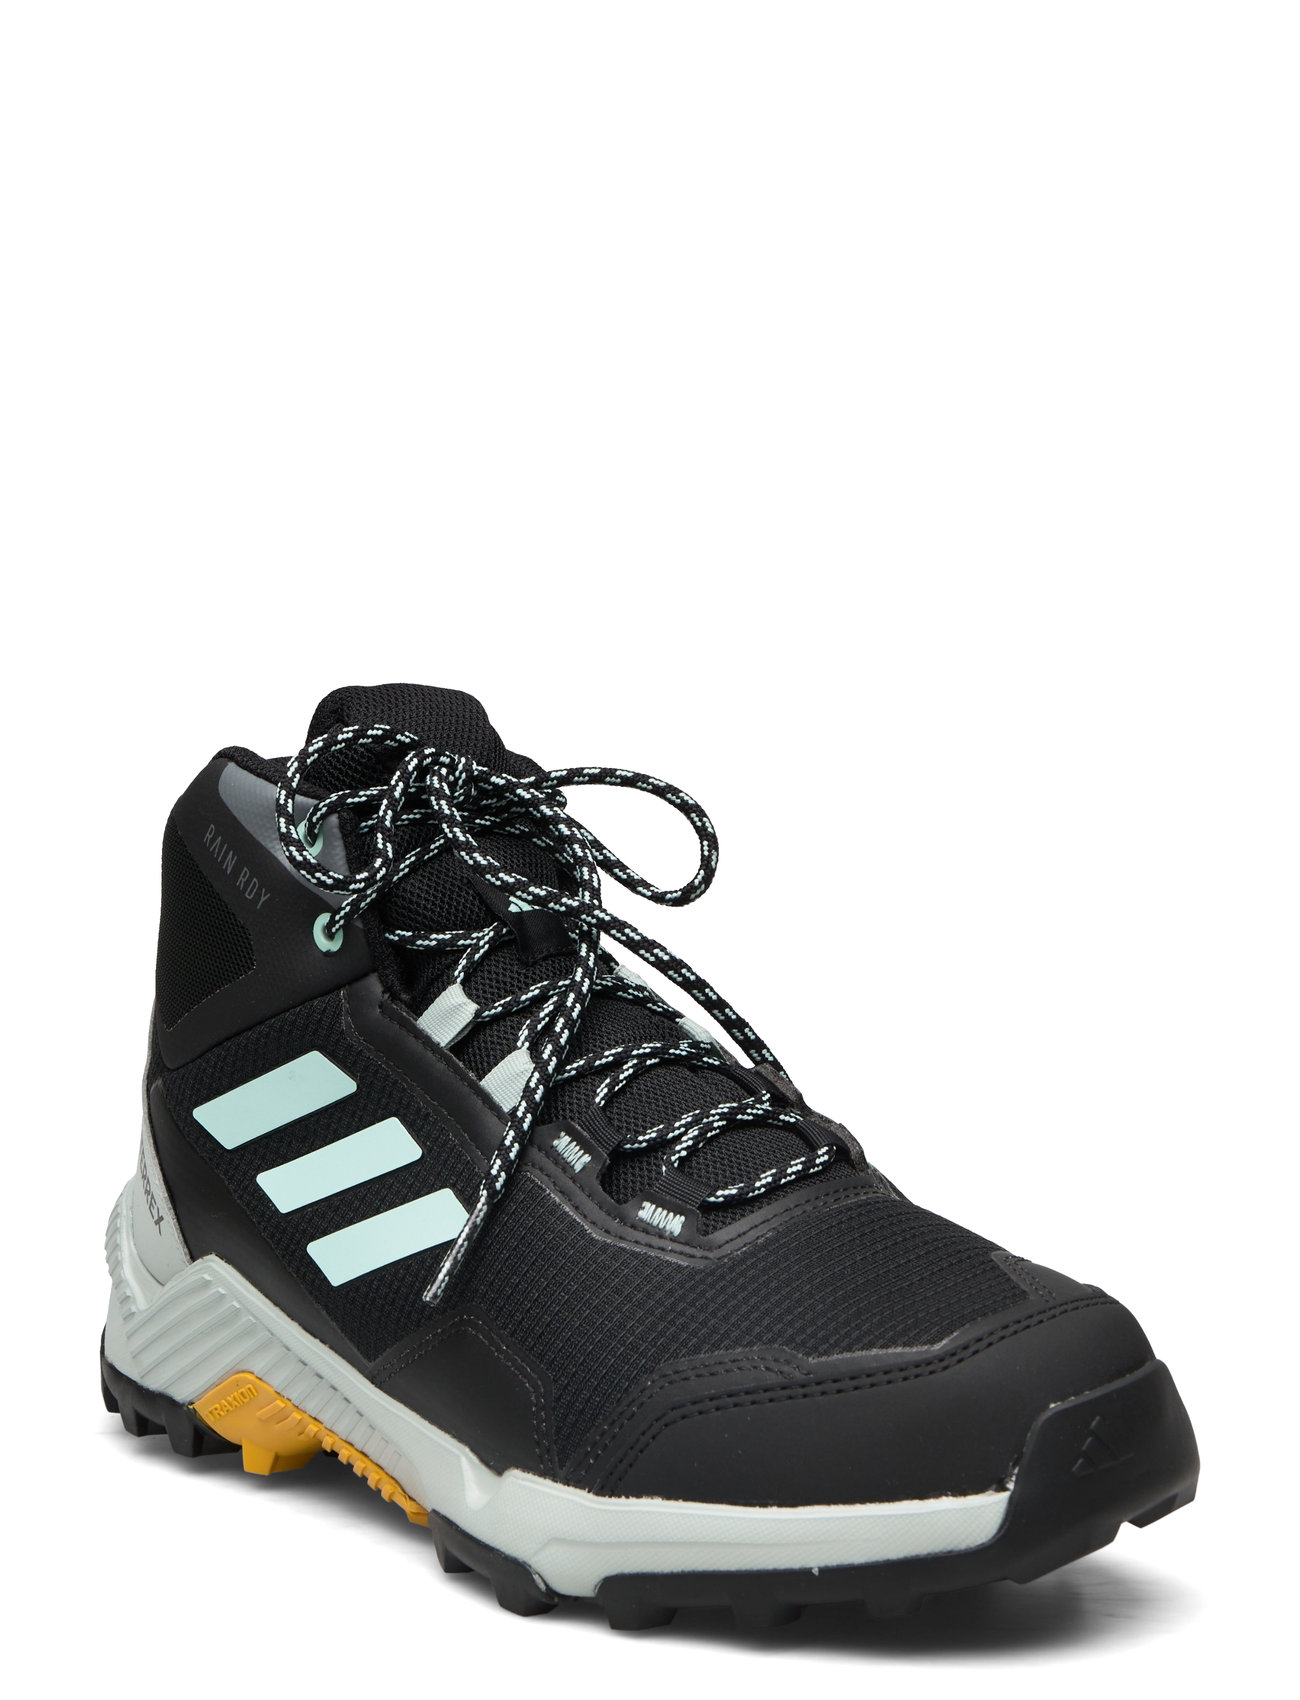 Eastrail 2.0 Mid Rain.rdy Hiking Shoes Sport Sport Shoes Outdoor-hiking Shoes Black Adidas Terrex